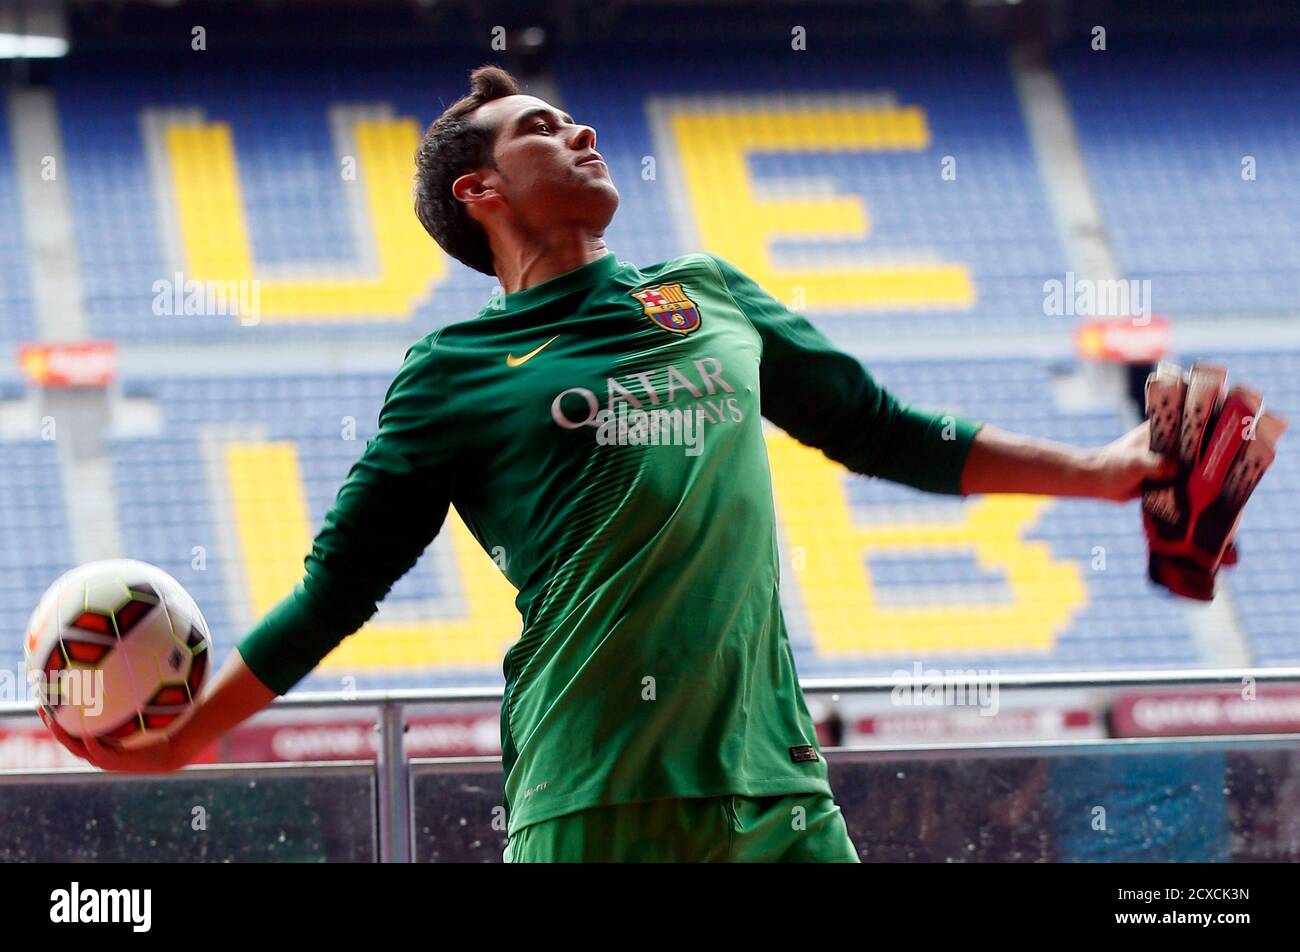 FC Barcelona's newly signed goalkeeper Claudio Bravo from Chile throws a  ball to supporters while wearing his new jersey during his presentation at  Camp Nou stadium, in Barcelona July 7, 2014. REUTERS/Albert